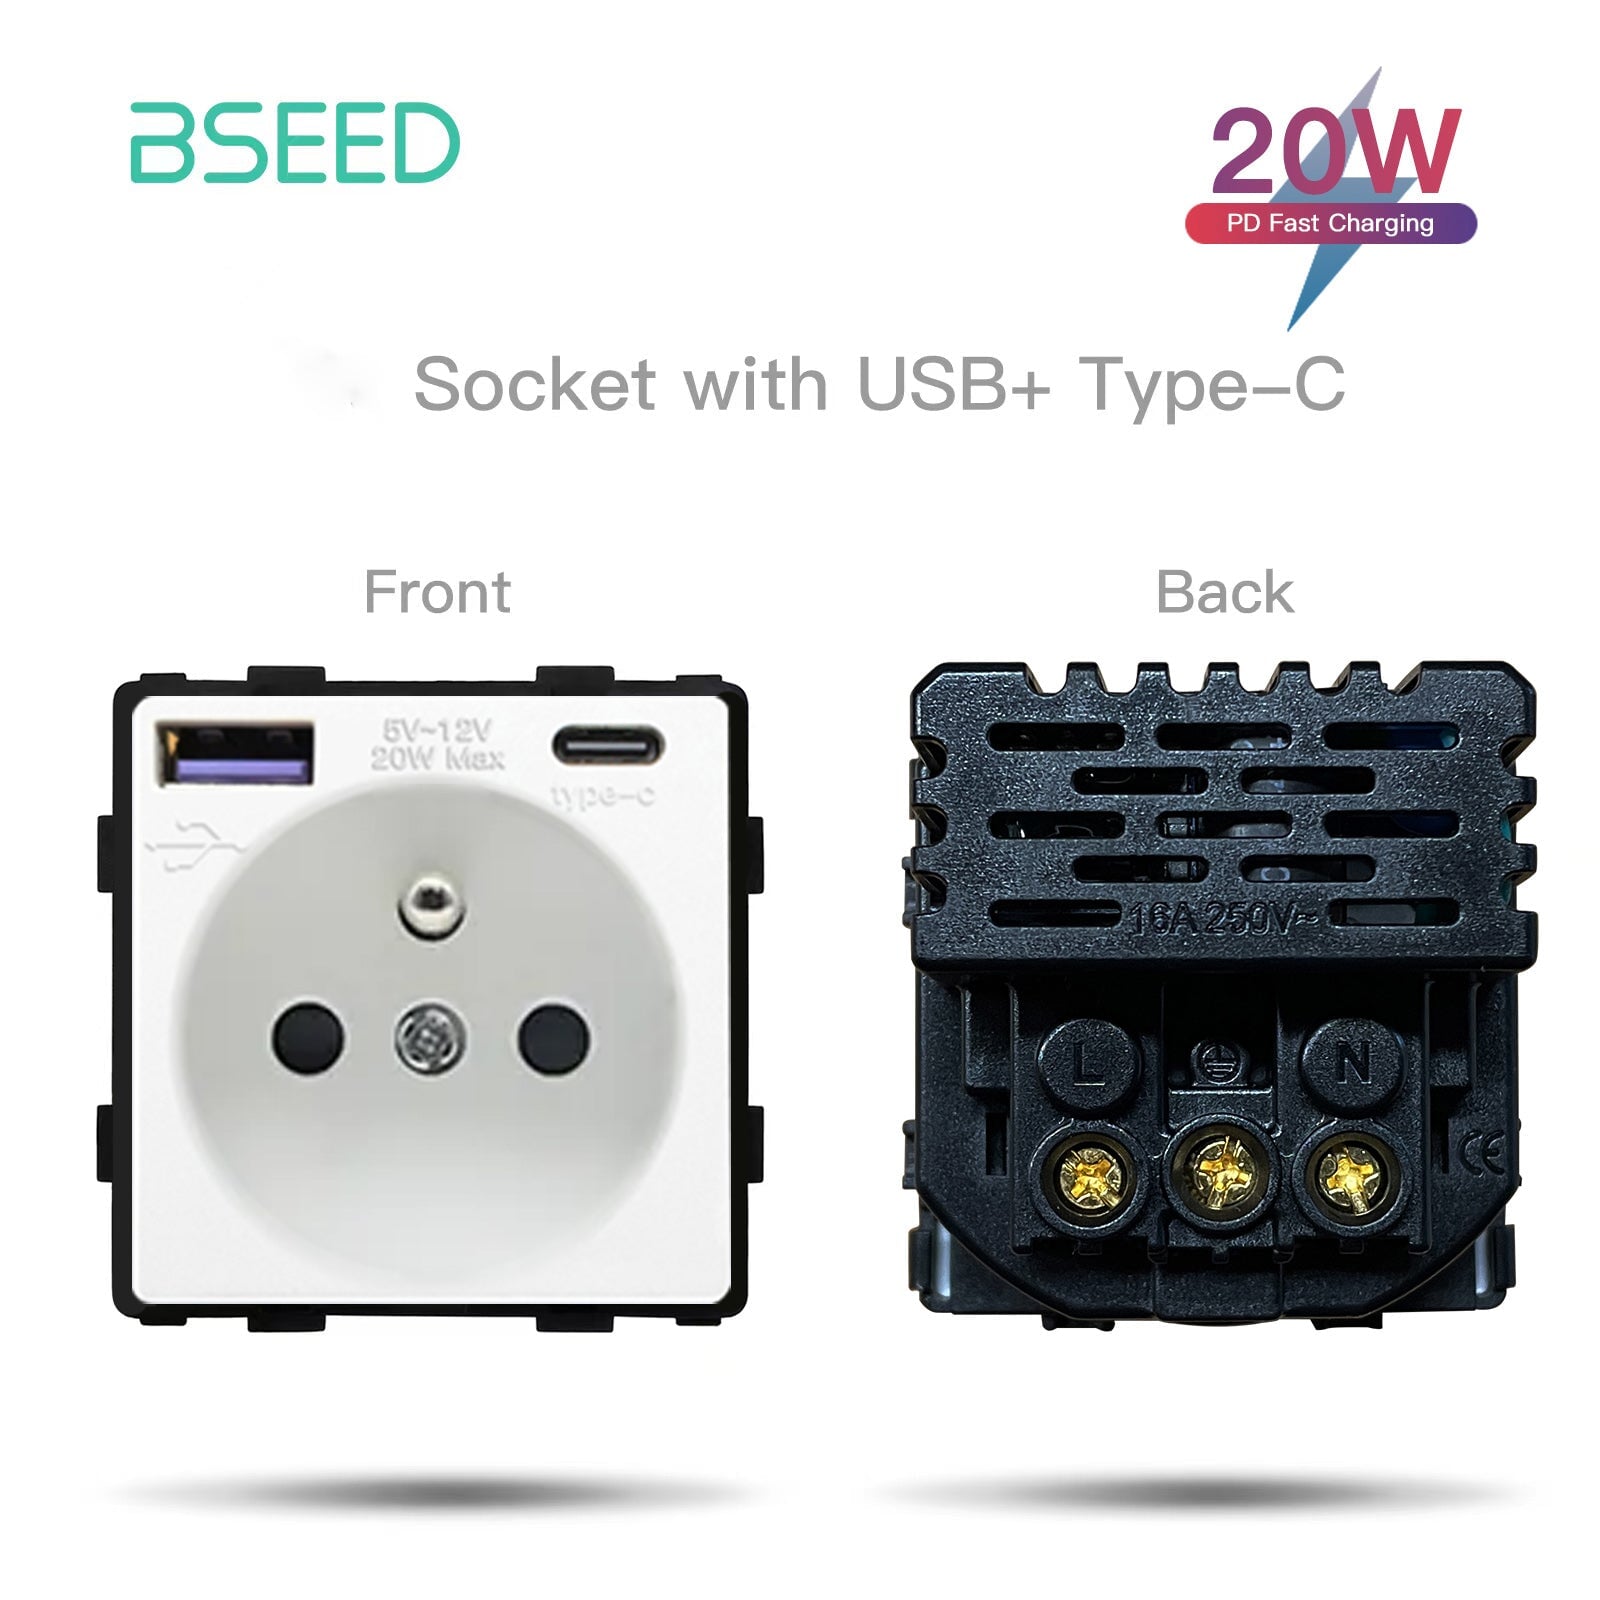 BSEED French Type-C Interface Outlet Wall Socket 16A USB Charge Power Outlets & Sockets Bseedswitch White 20W 